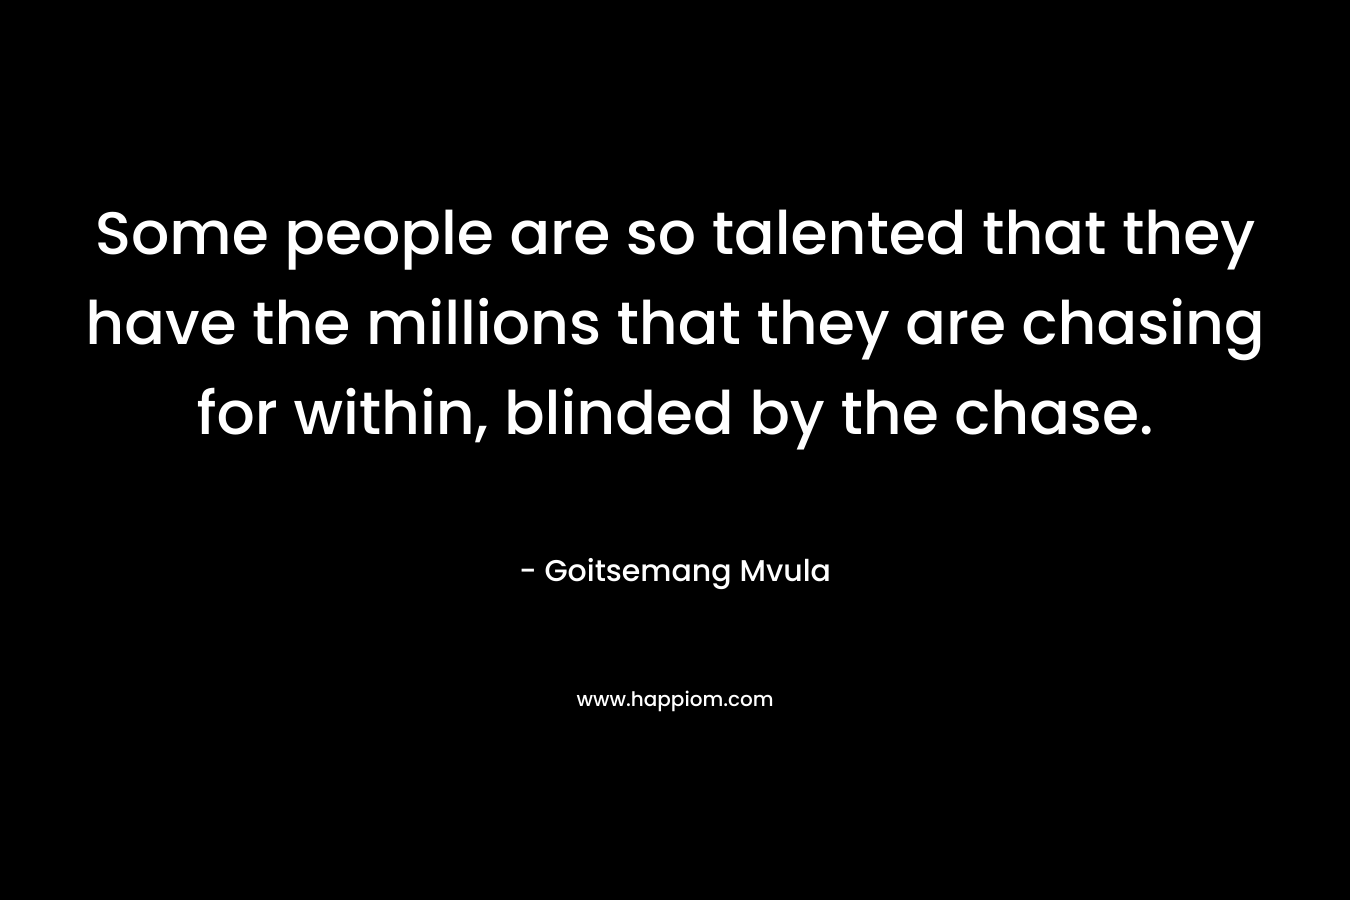 Some people are so talented that they have the millions that they are chasing for within, blinded by the chase.